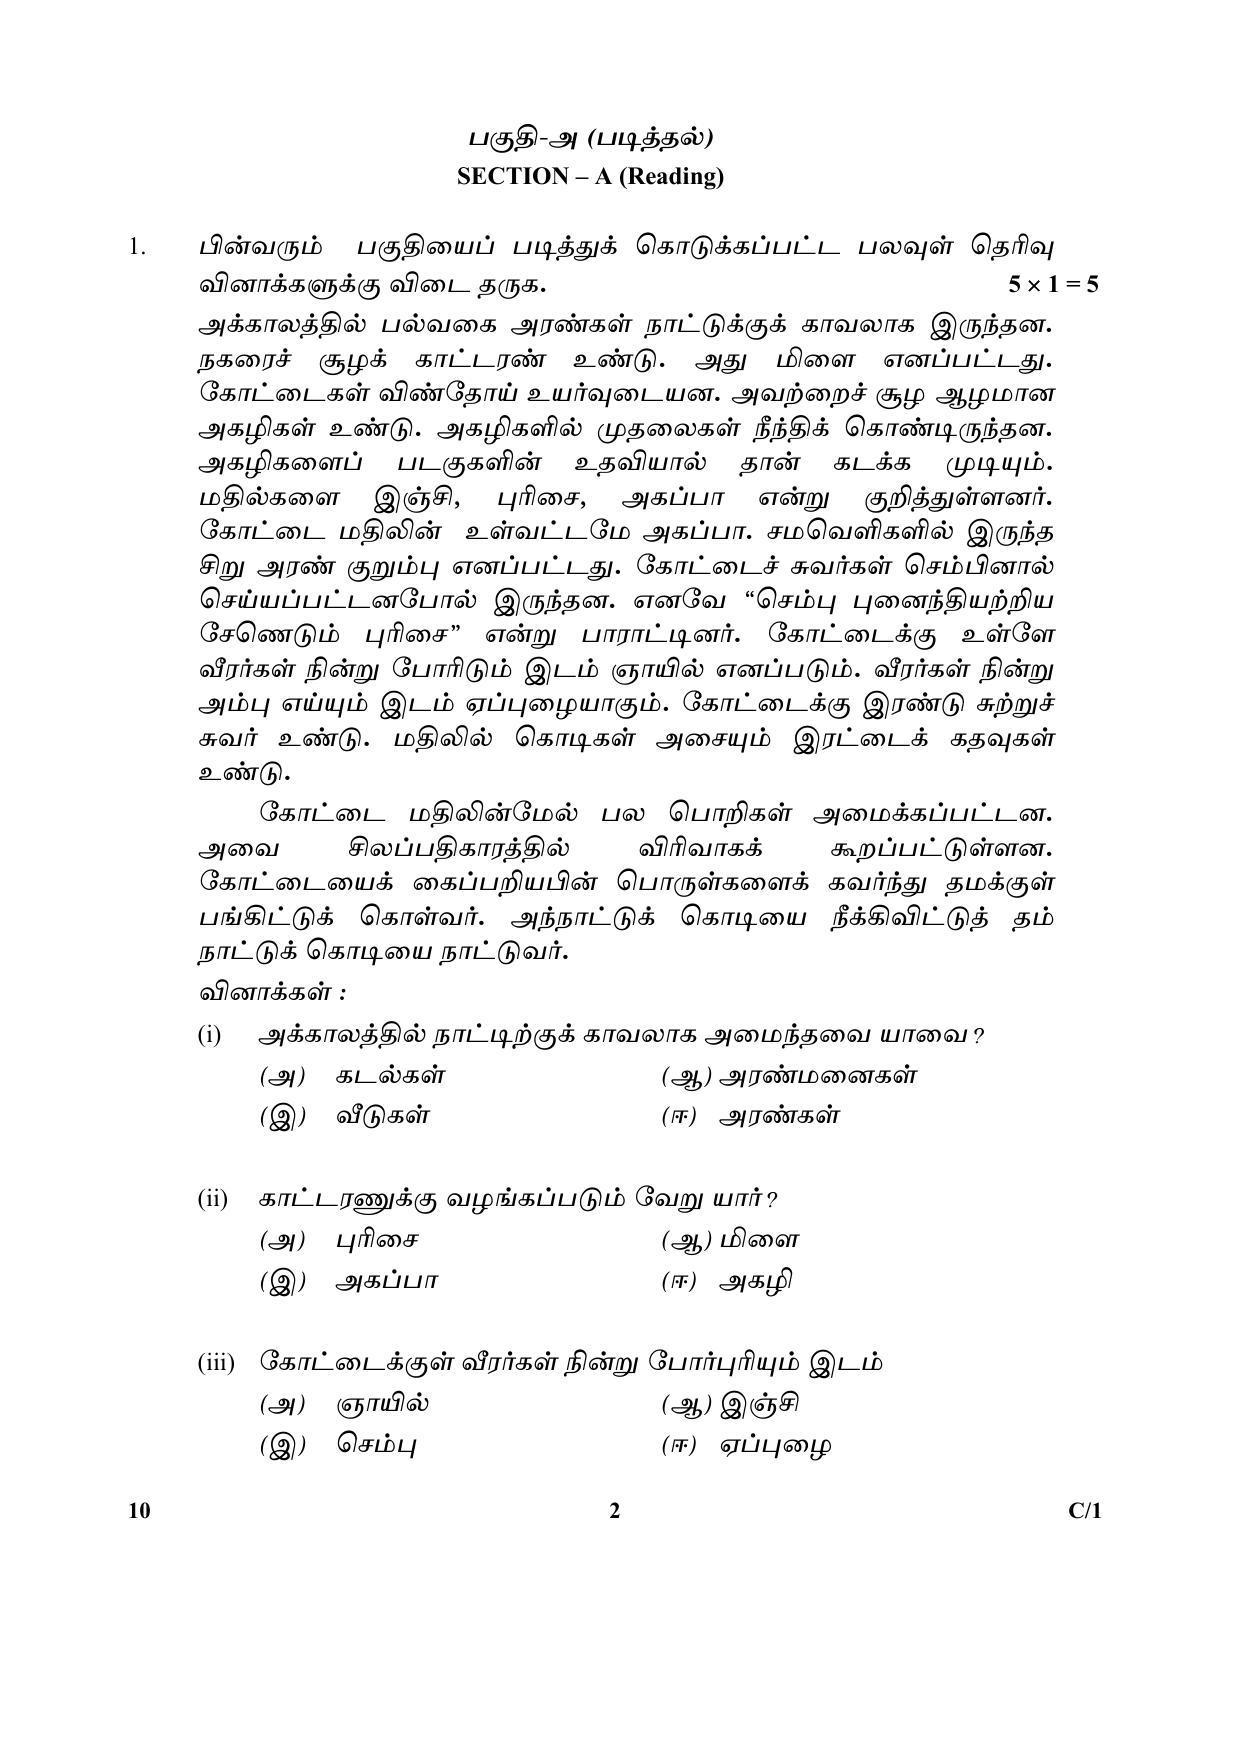 CBSE Class 10 10 (Tamil) 2018 Compartment Question Paper - Page 2